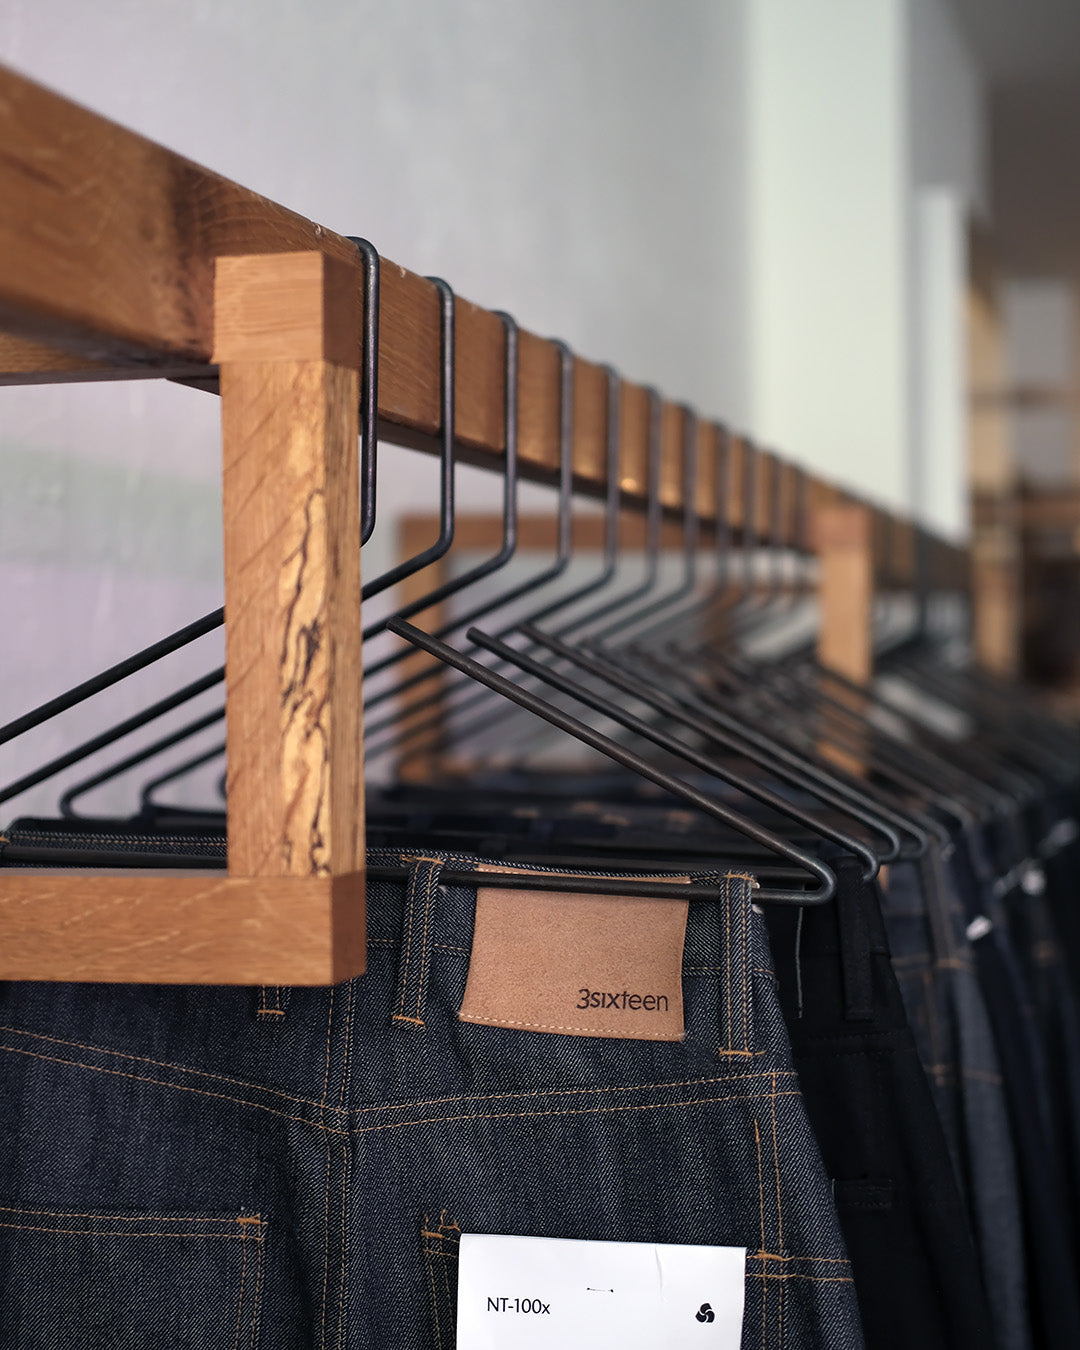 A photo of jeans hanging on a wooden bar